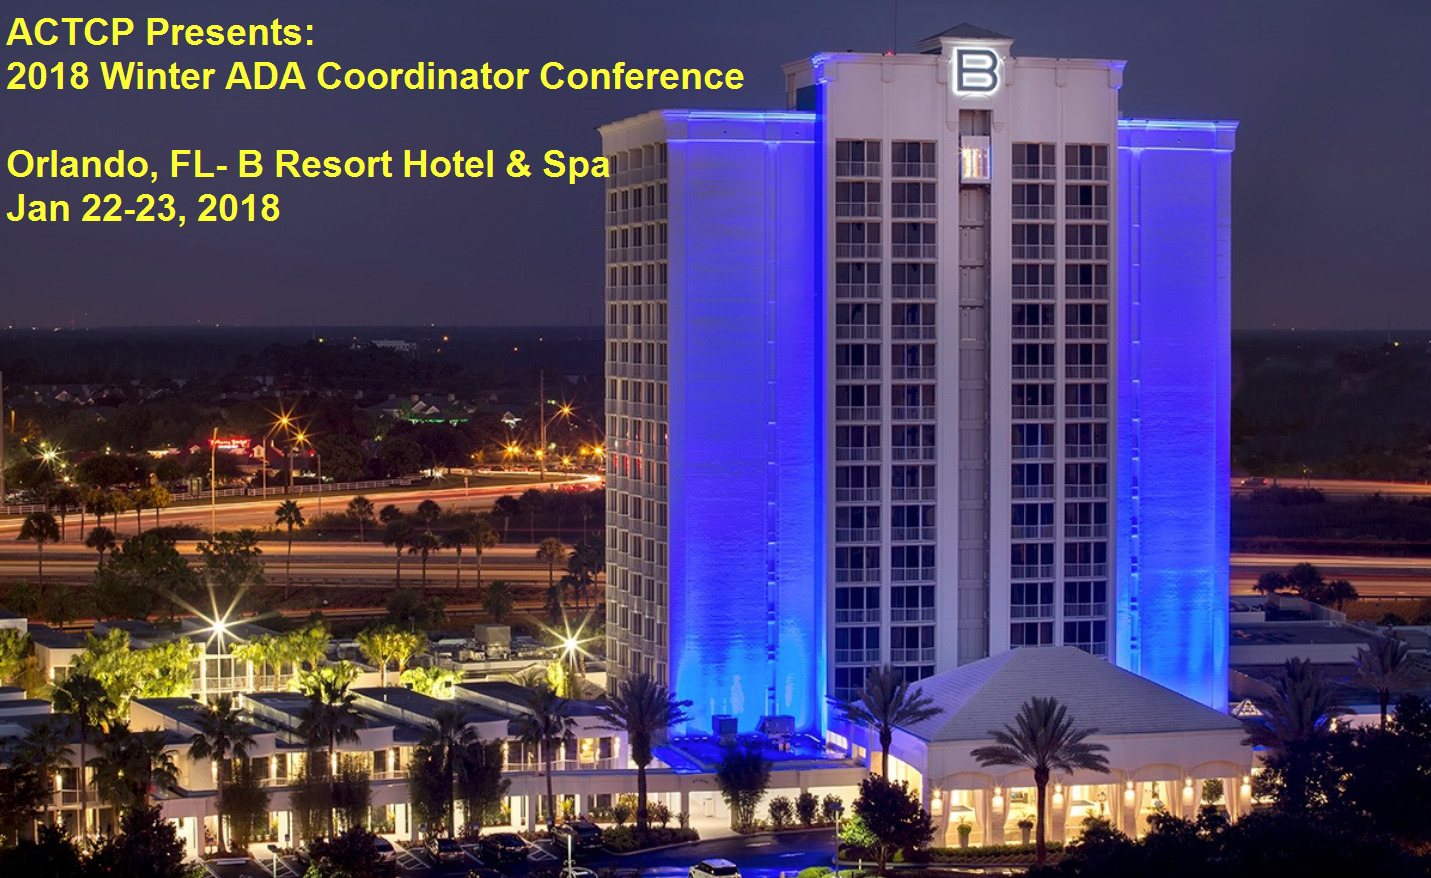 image of B resort with text: ACTCP presents 2018 Winter ADA Coordinator Conference, Orlando, FL - B Resort Hotel and Spa, January 22-23, 2018